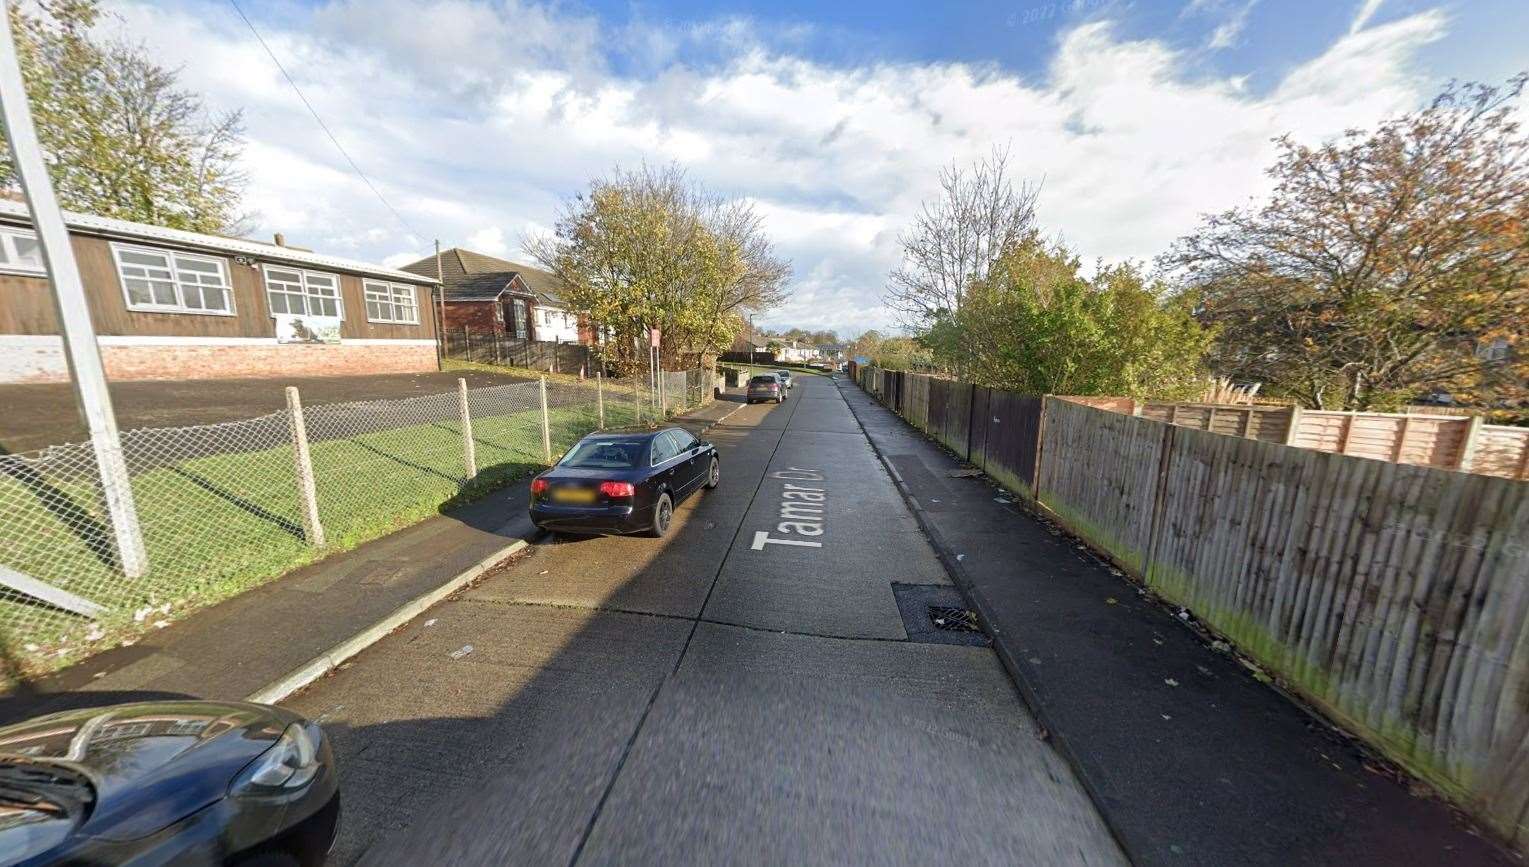 The attack happened in an alleyway near Tamar Drive, in Strood. Picture: Google Maps